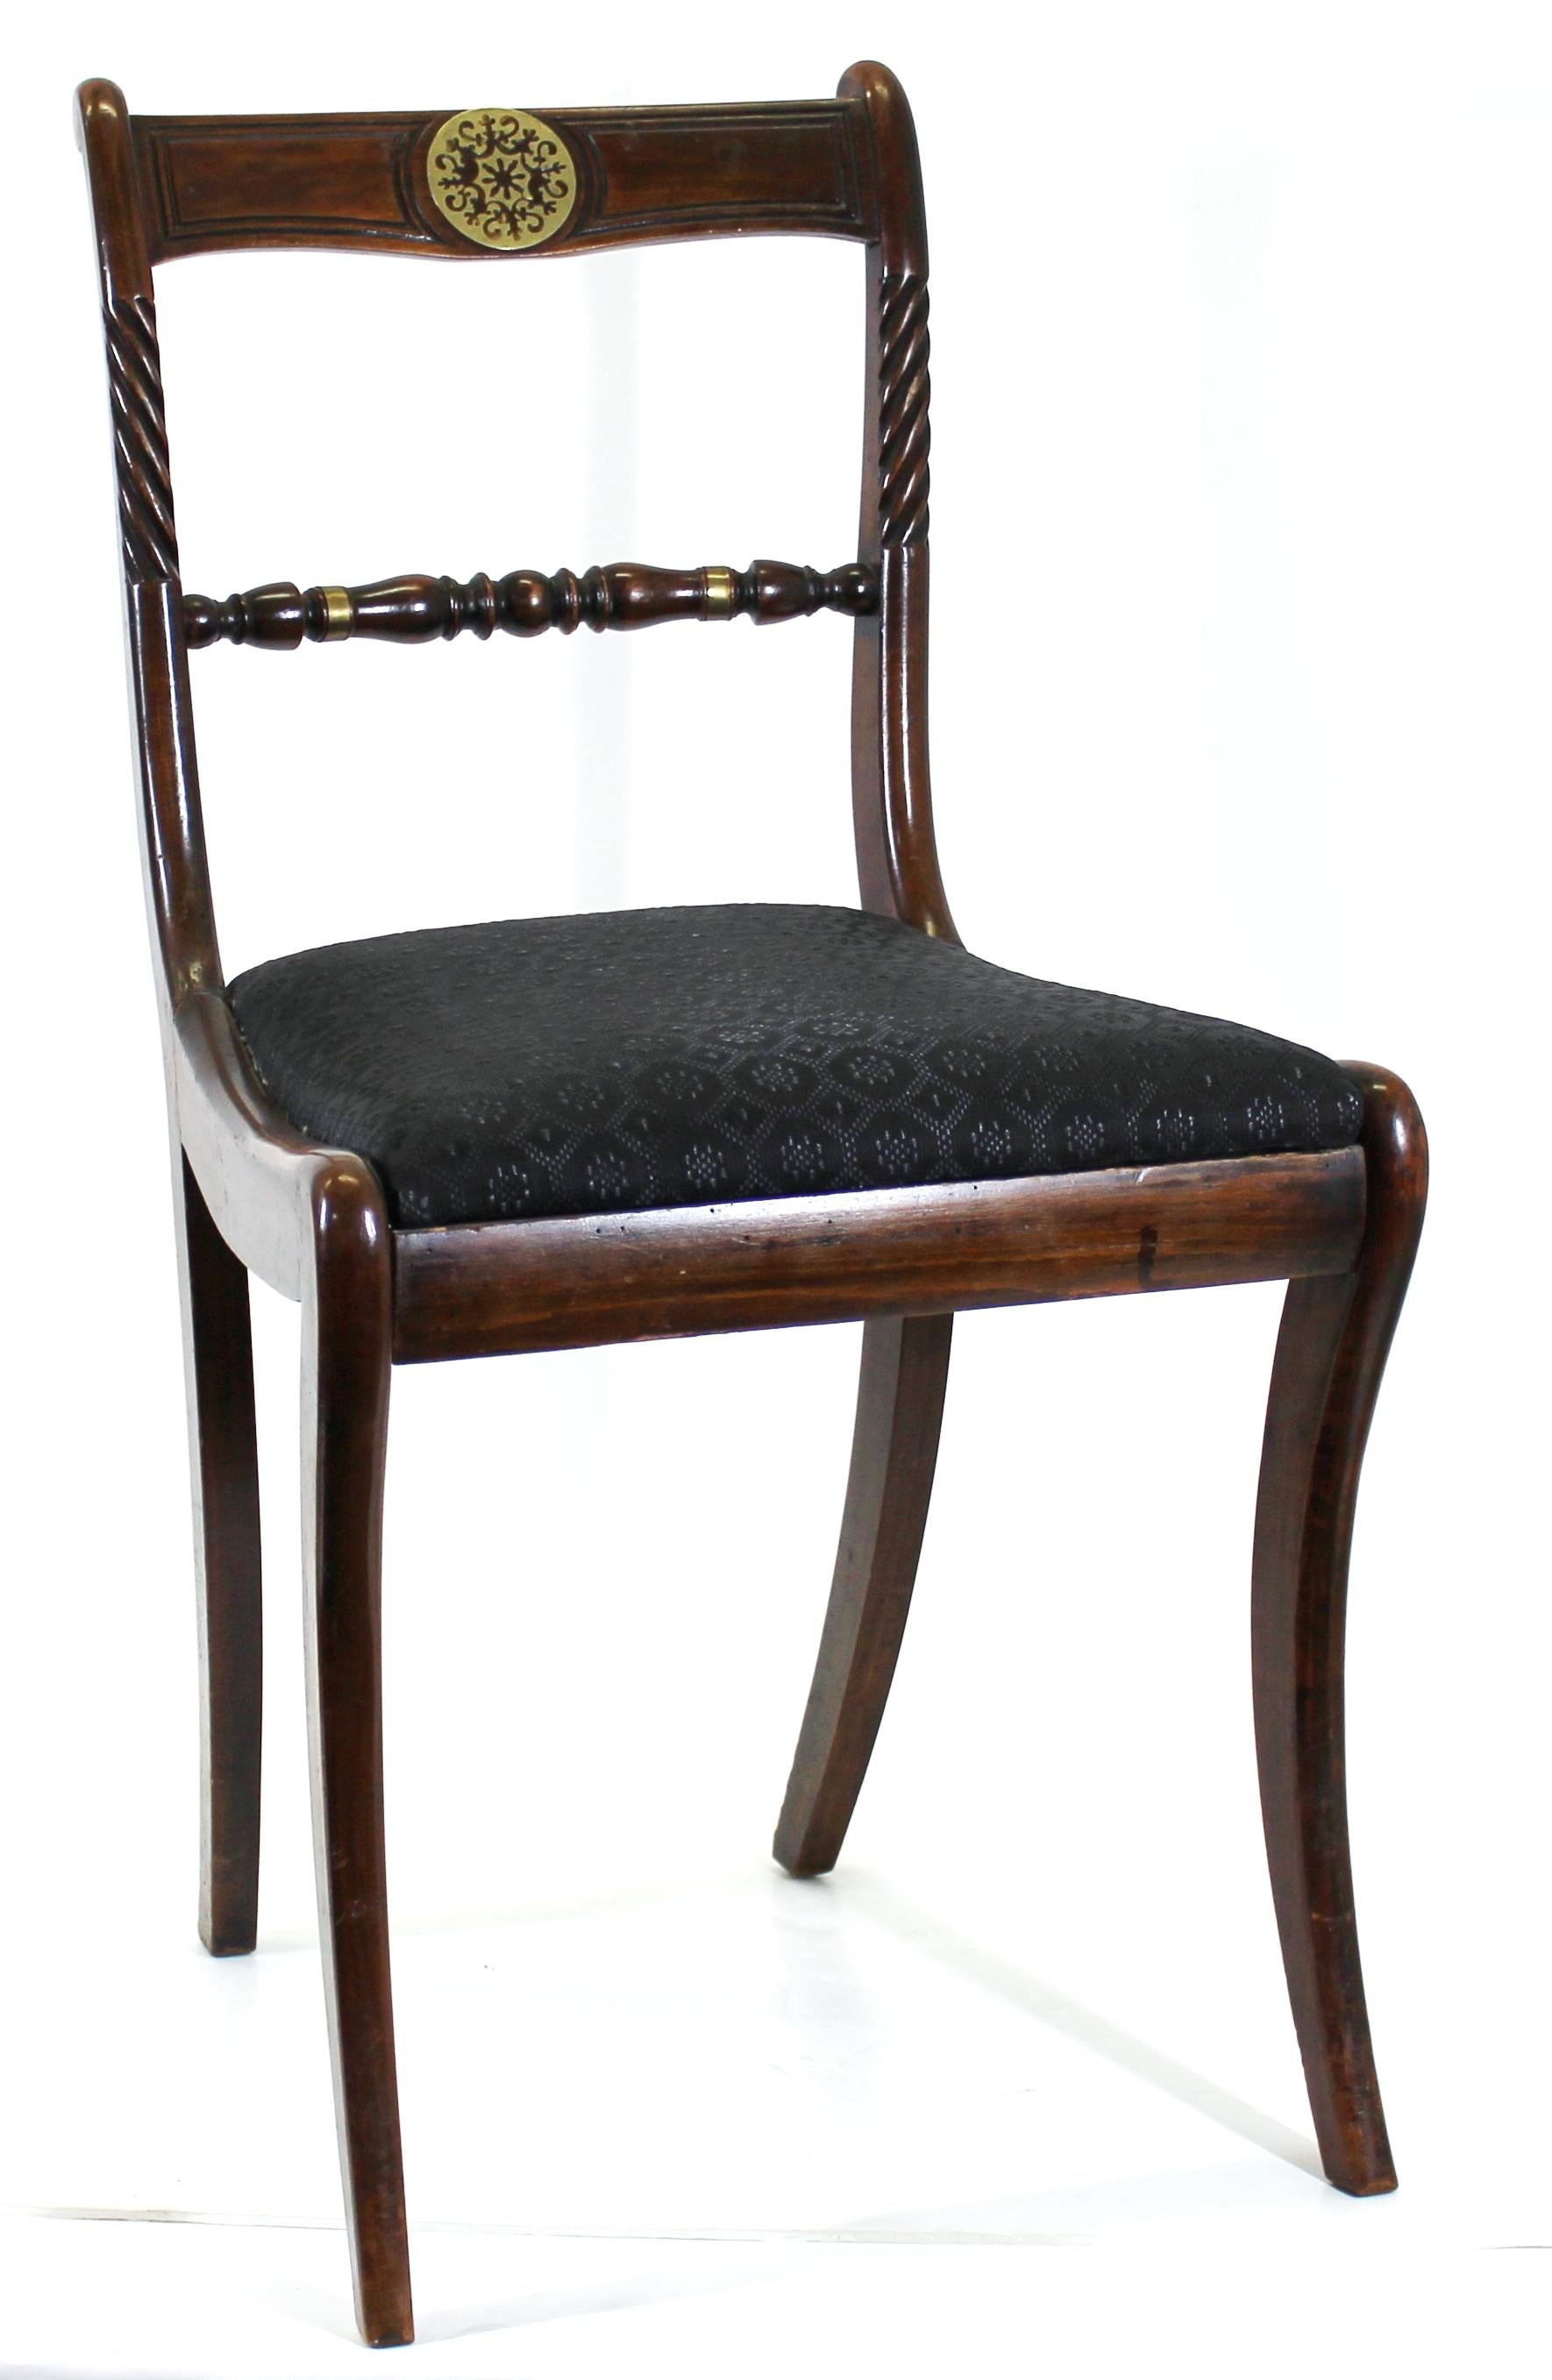 English Regency 'Trafalgar chairs' with sabre shaped legs and brass embellishments. Nautical elements like rope carved risers evoke the British Royal Navy and the Battle of Trafalgar, after which this type of chair became popular, Circa 1810. Set of